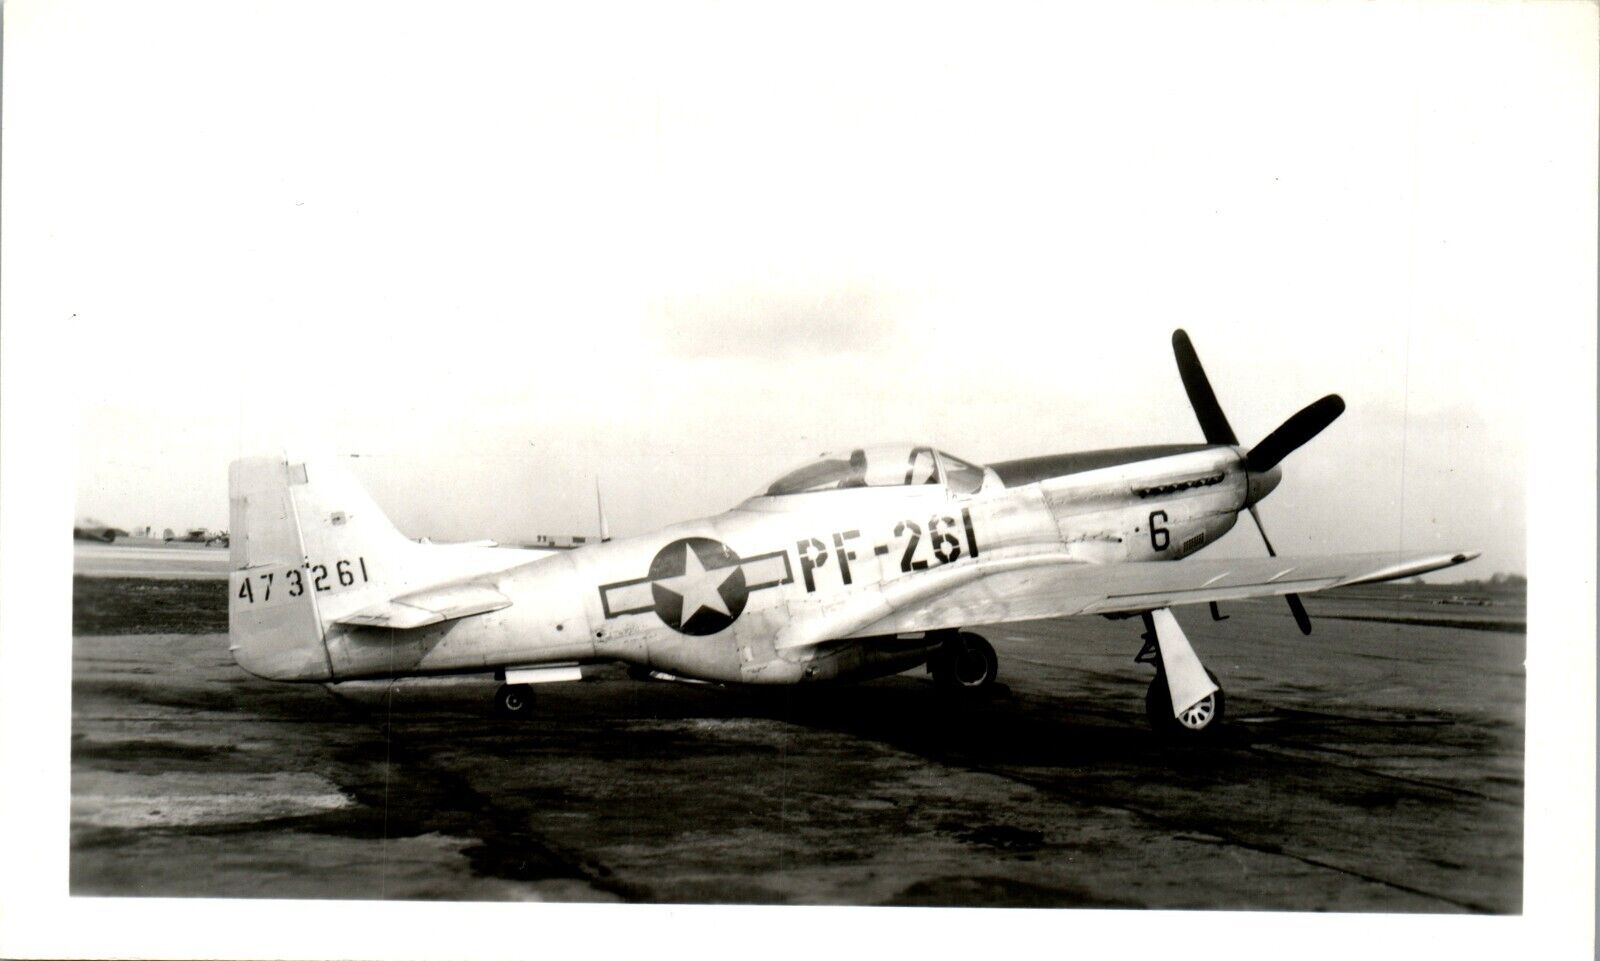 North American P-51 Mustang Fighter Plane Photo (3 x 5)